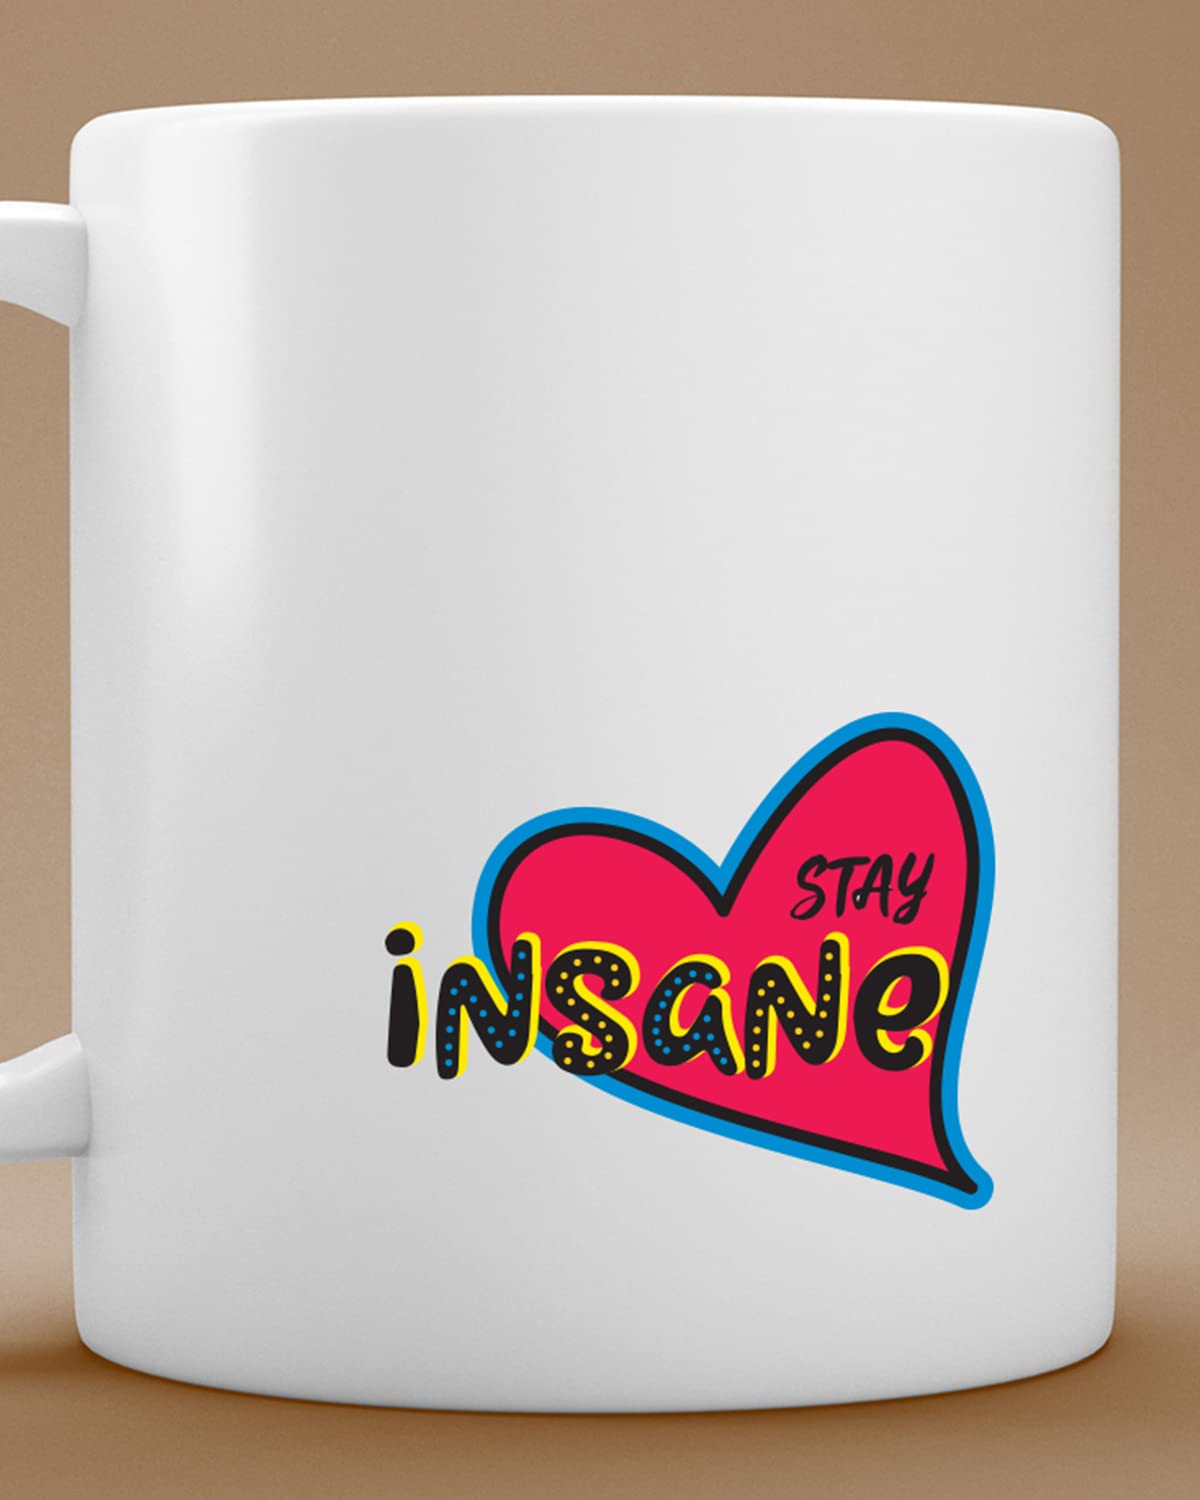 The Pink Magnet Stay Insane Coffee Mug| Romantic Printed Coffee Mug for Birthday,Anniversary Gift,Valentine's Day Gift, for Someone Special Inspirational thoughts | inspiring gifts for boyfriend | inspiring quotes | Printed coffee mug(Ceram